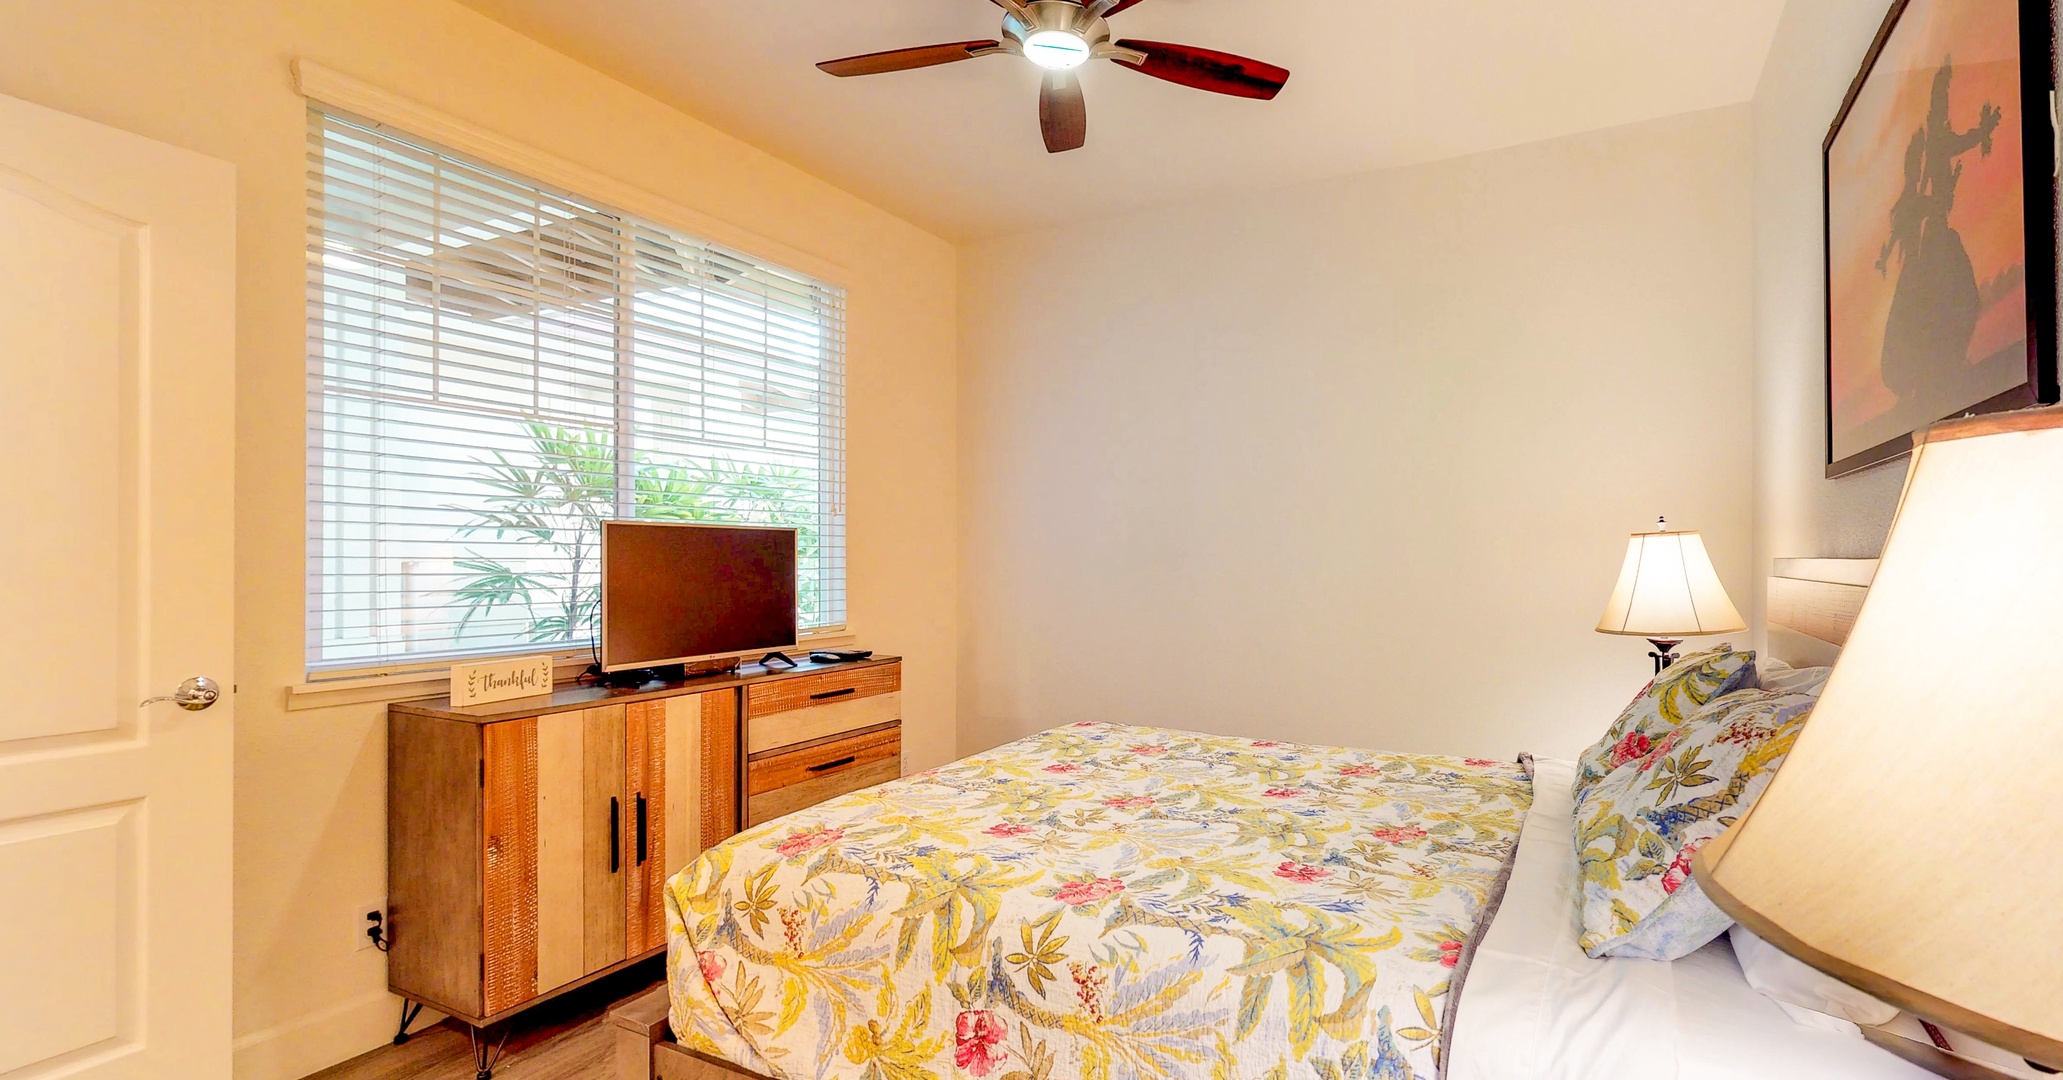 Kapolei Vacation Rentals, Ko Olina Kai 1051D - The downstairs bedroom has a dresser, TV and ceiling fan.